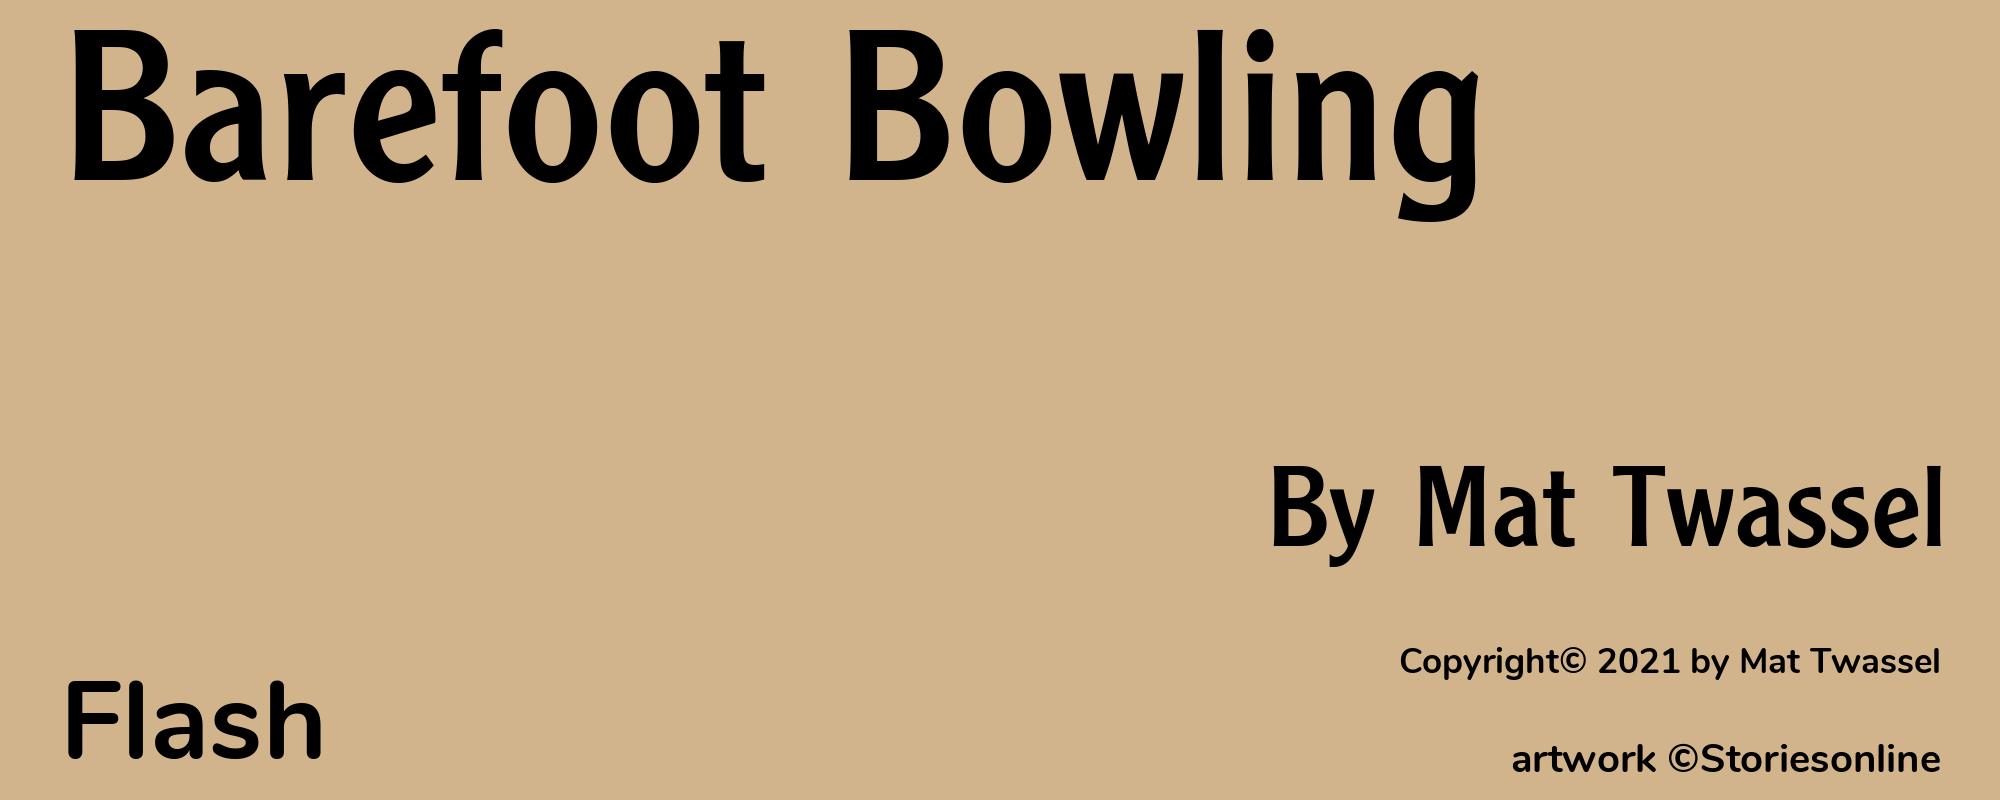 Barefoot Bowling - Cover